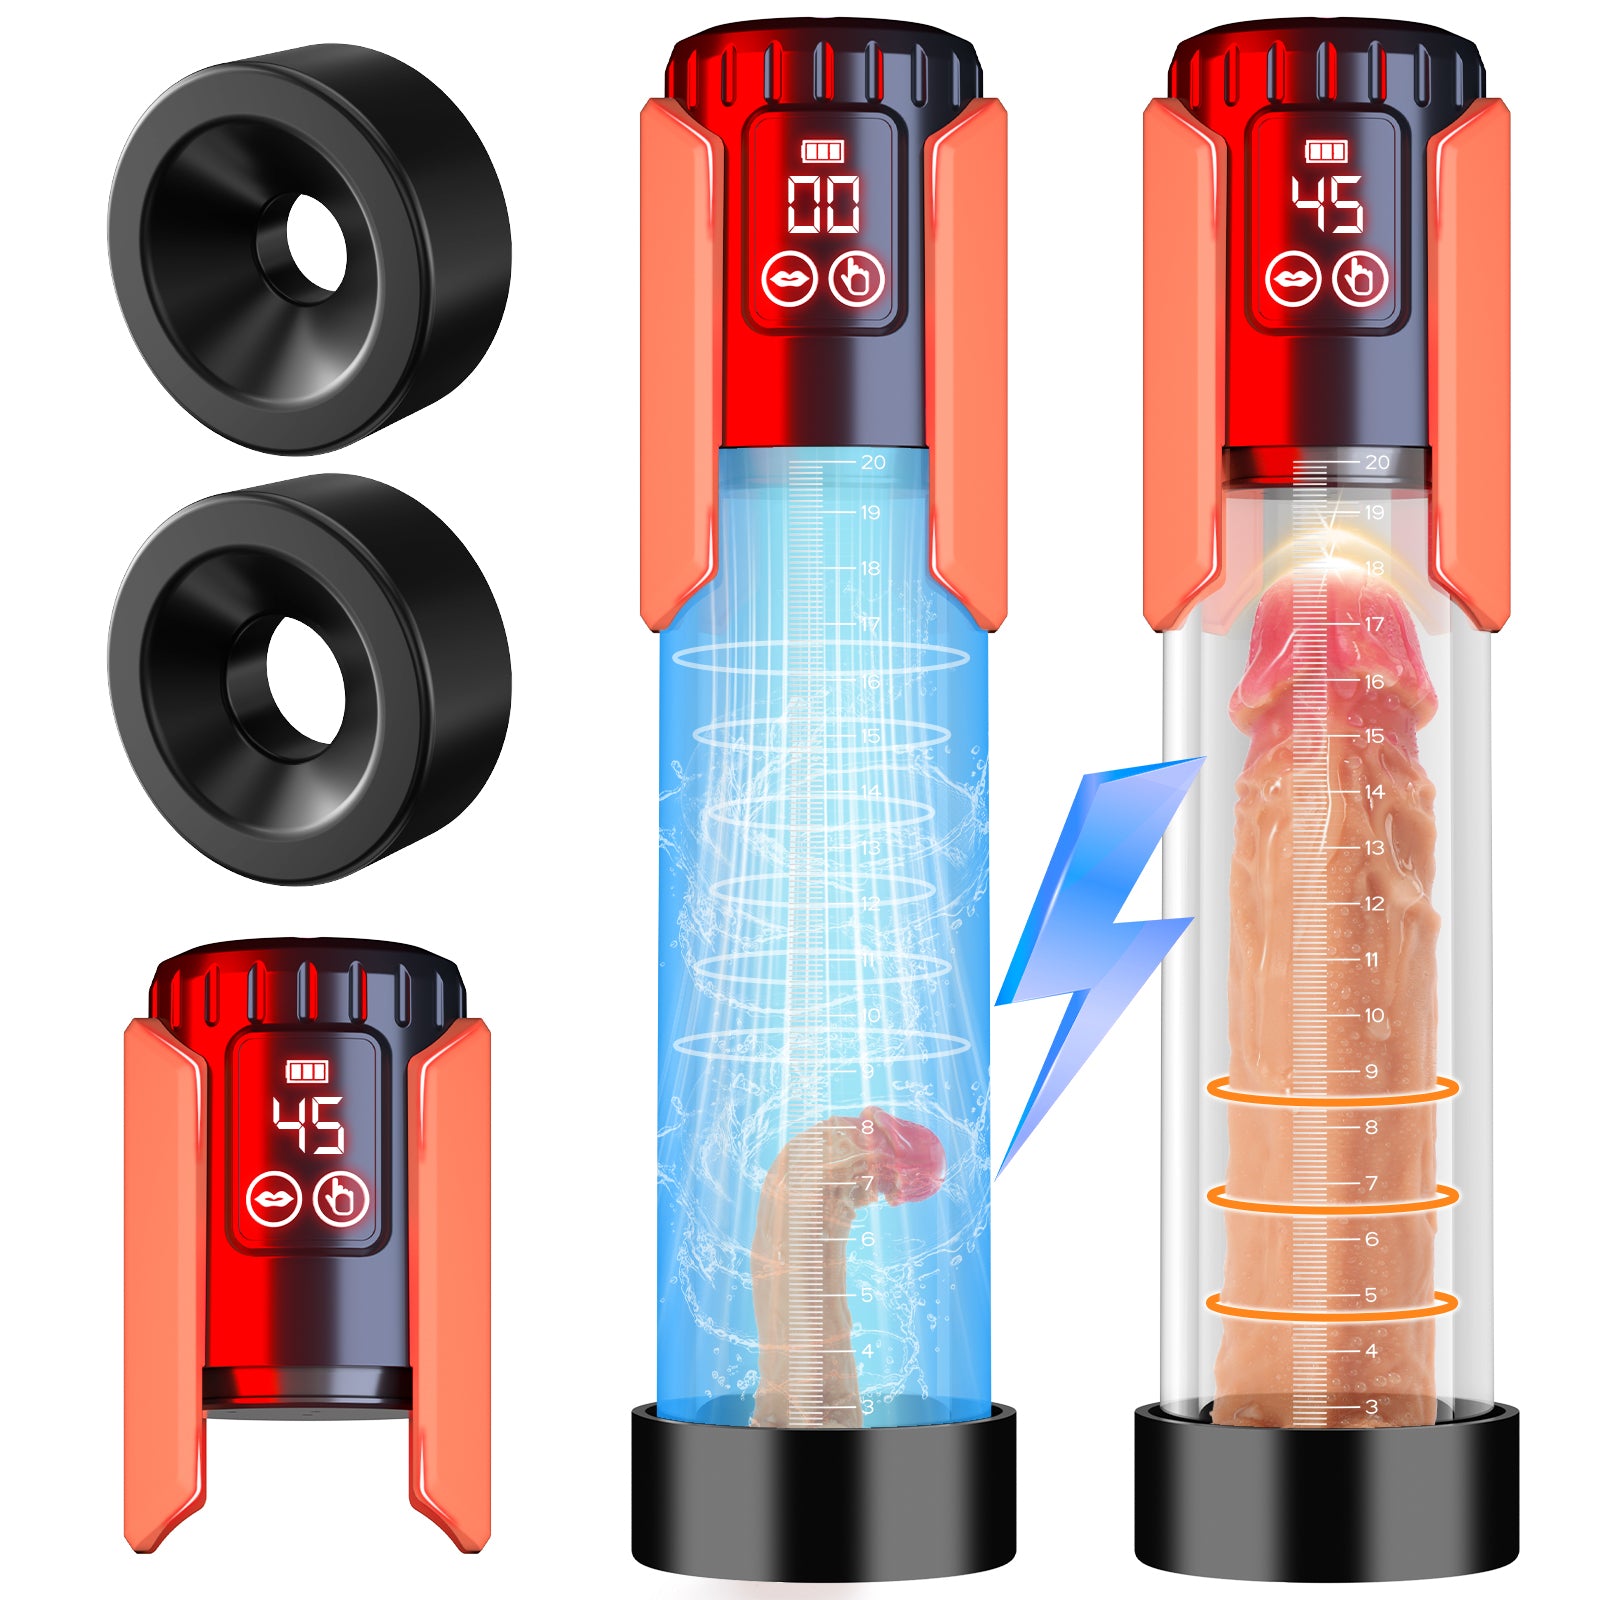 FIDECH Easy-to-See Display Electric Penis Pump Male Toy